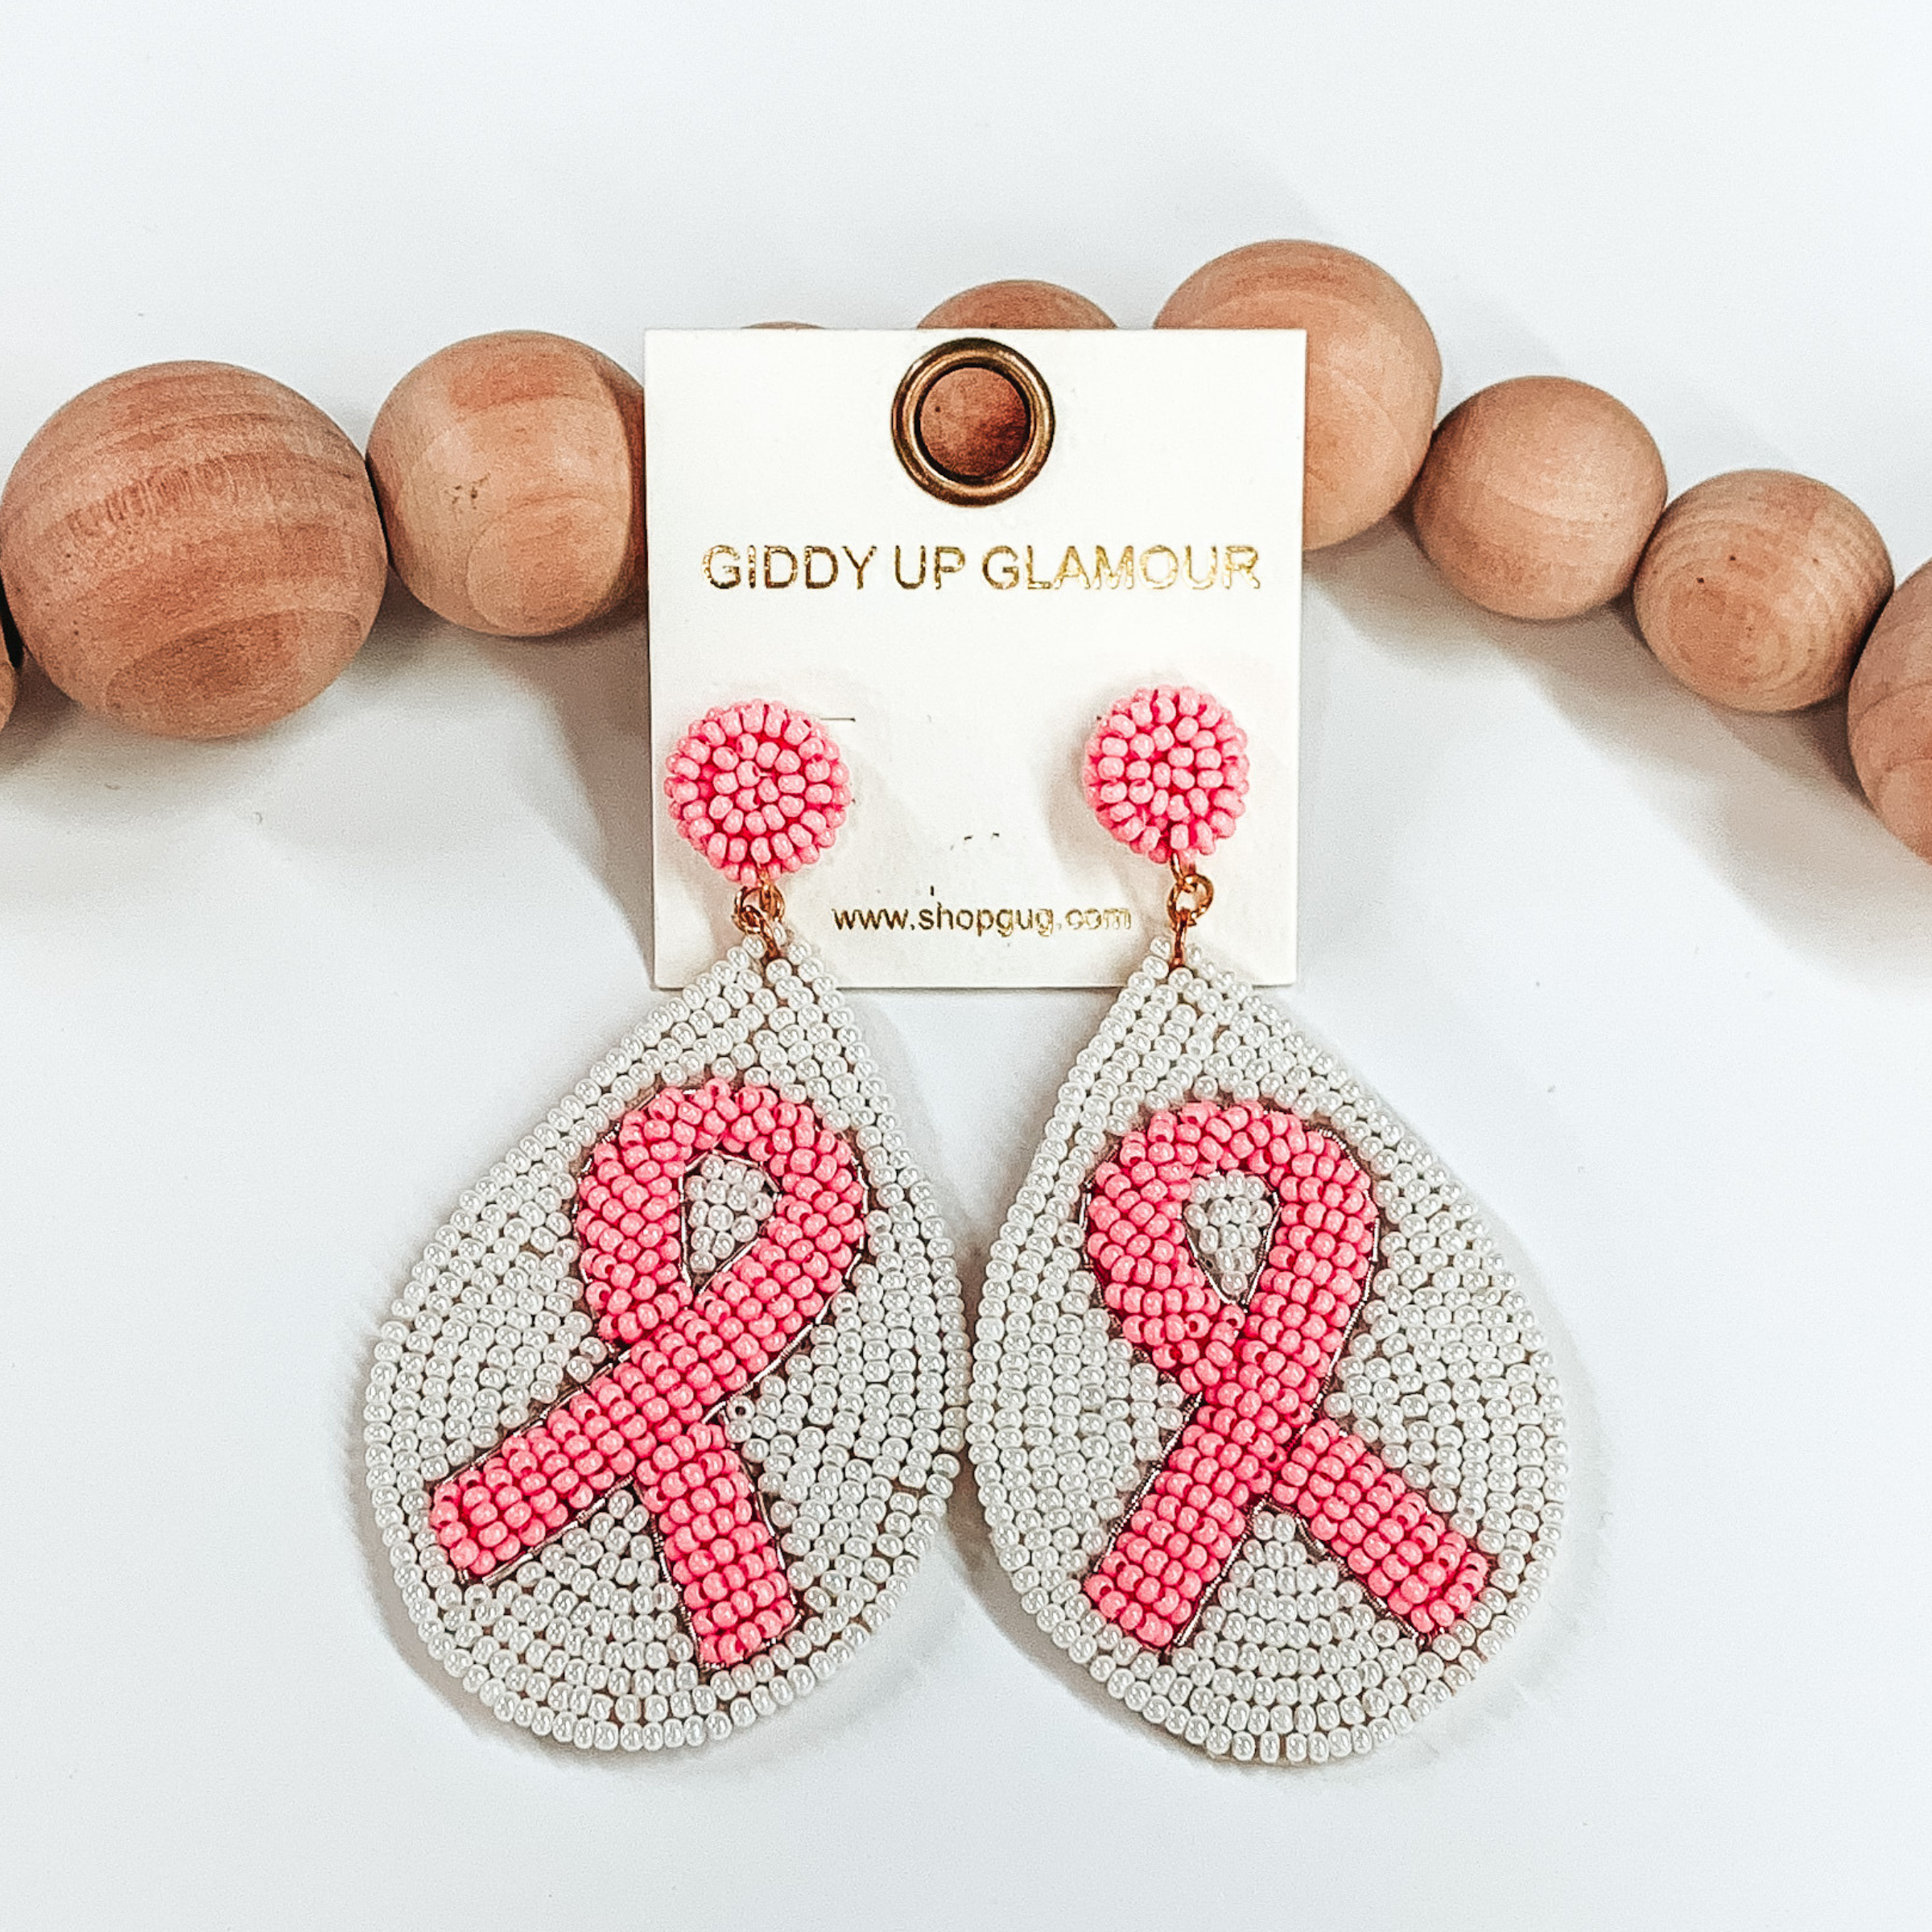 Light pink beaded circle studs with hanging beaded teardrop pendant. The pendant has a  white beaded background with a center beaded  light pink ribbon These earrings are pictured on a  white background with brown beads as decor. 